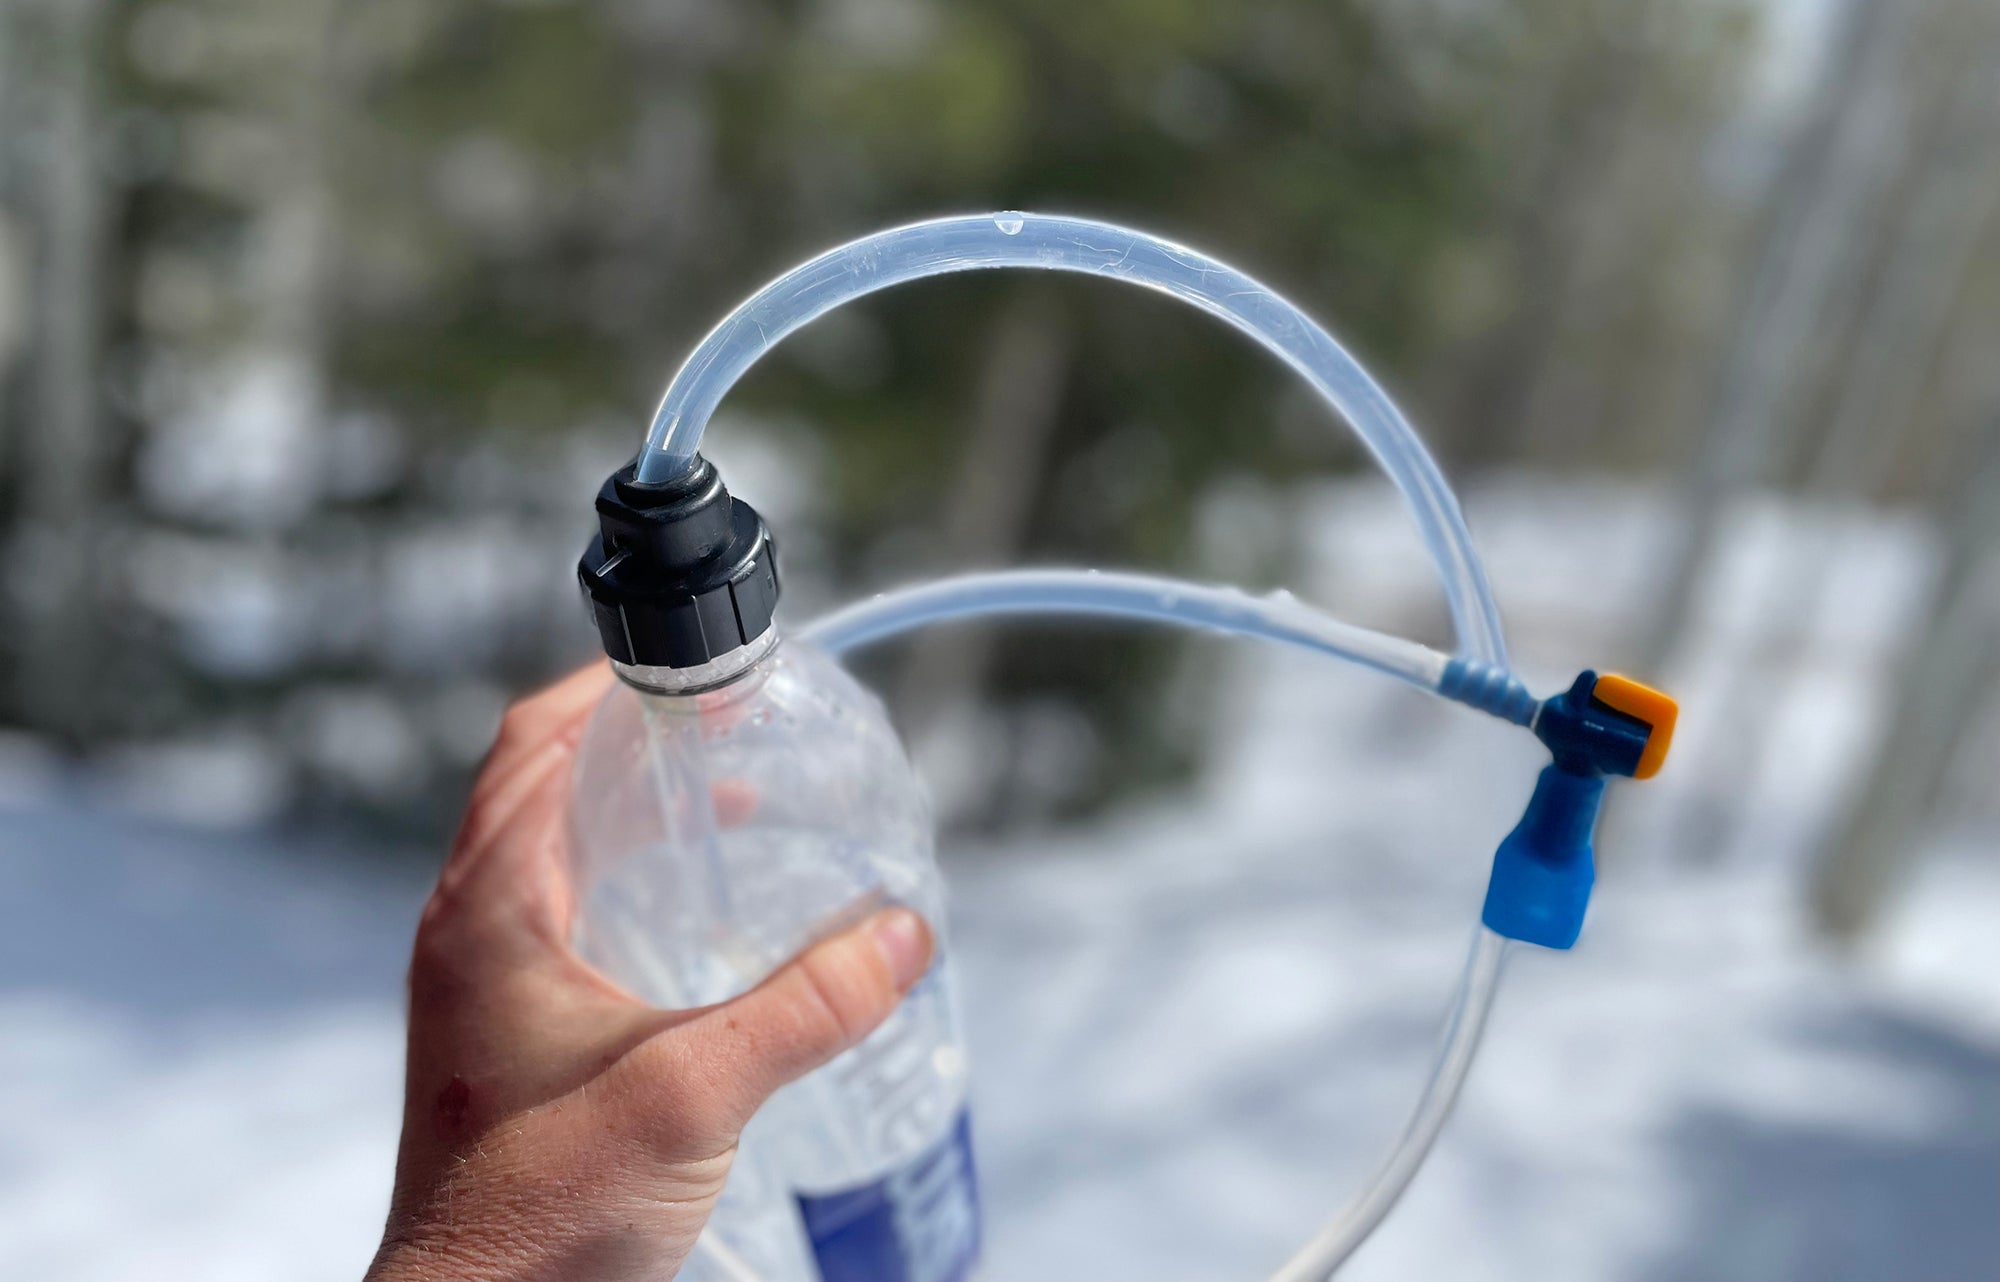 https://cdn.shopify.com/s/files/1/0537/1177/files/OneBottle_Review_Drinking_Tube_for_Your_Water_Bottle_Hiking_Backpacking_Copyright_GGG_Garage_Grown_Gear.jpg?v=1682105203